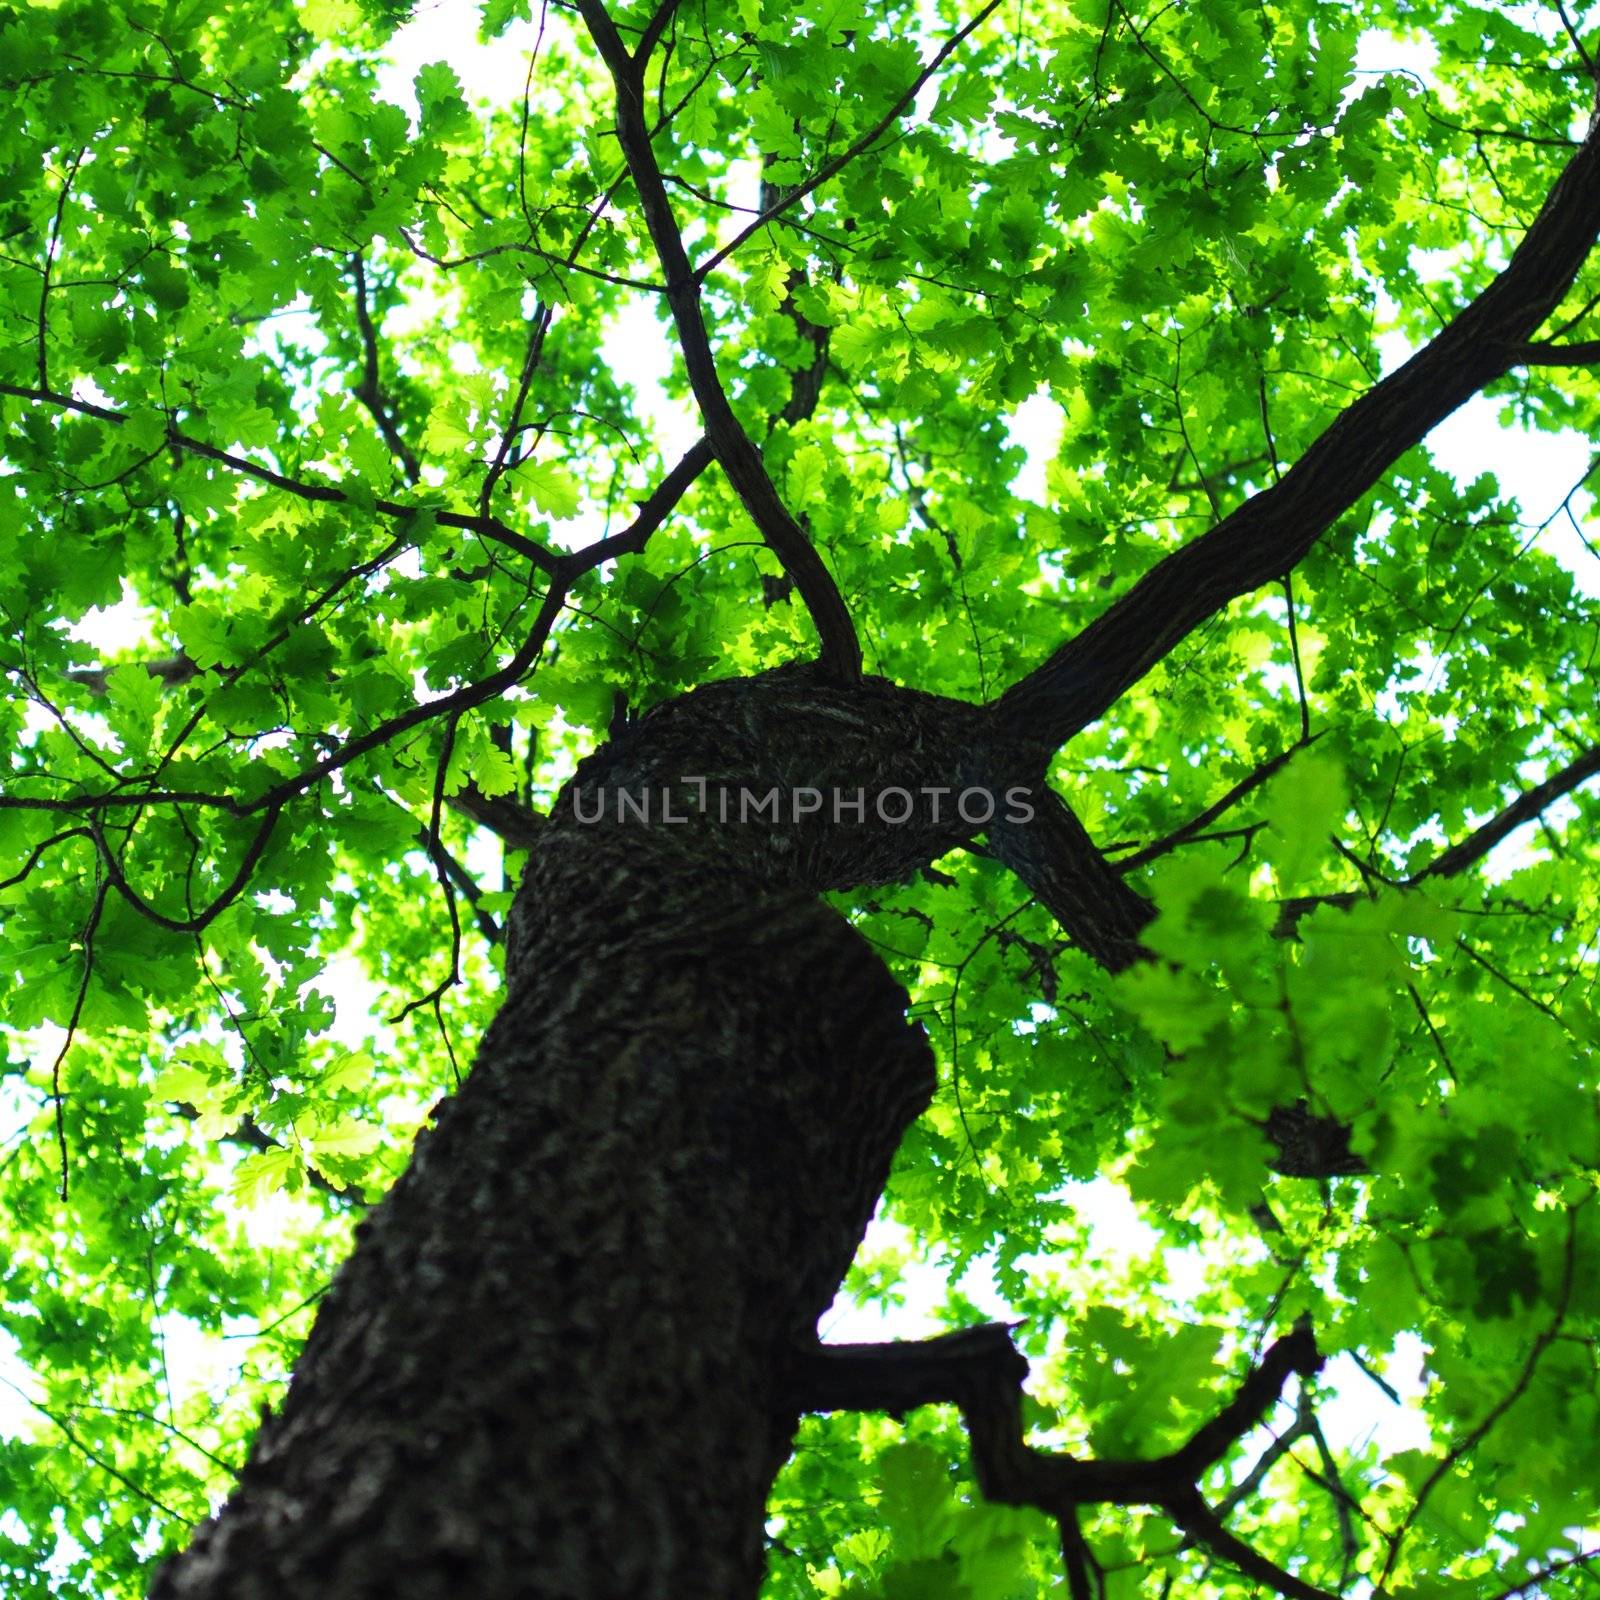 tree in summer forest with green leaves showing nature concept